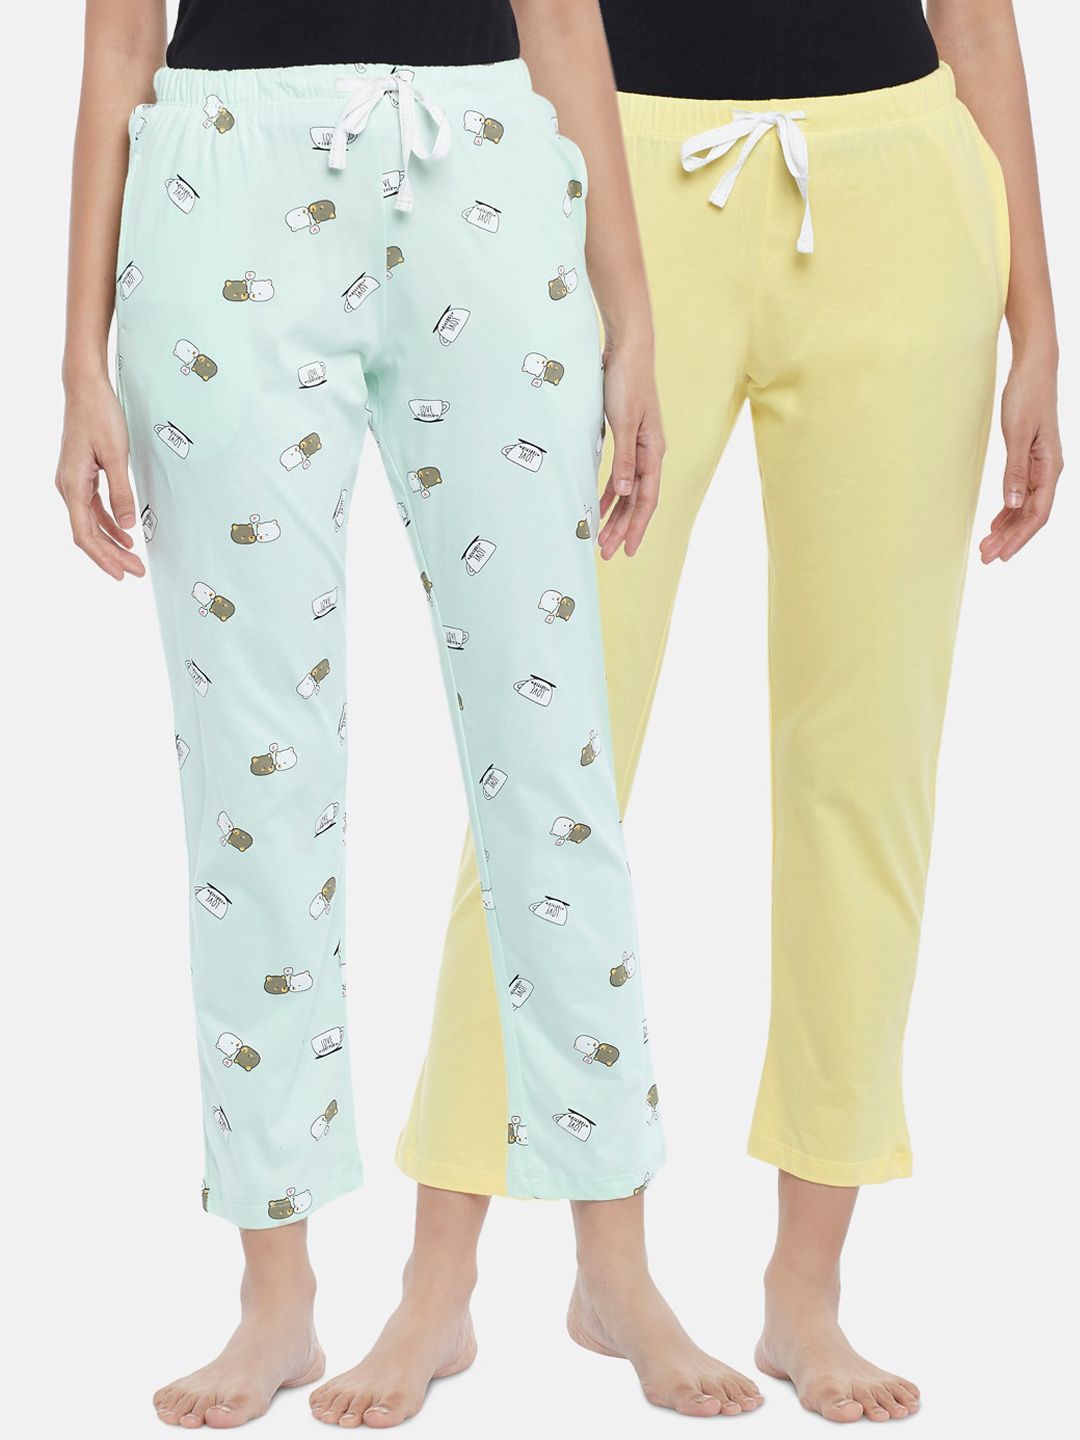 Dreamz by Pantaloons Women Set of 2 Blue & Yellow Printed Cotton Lounge Pants Price in India